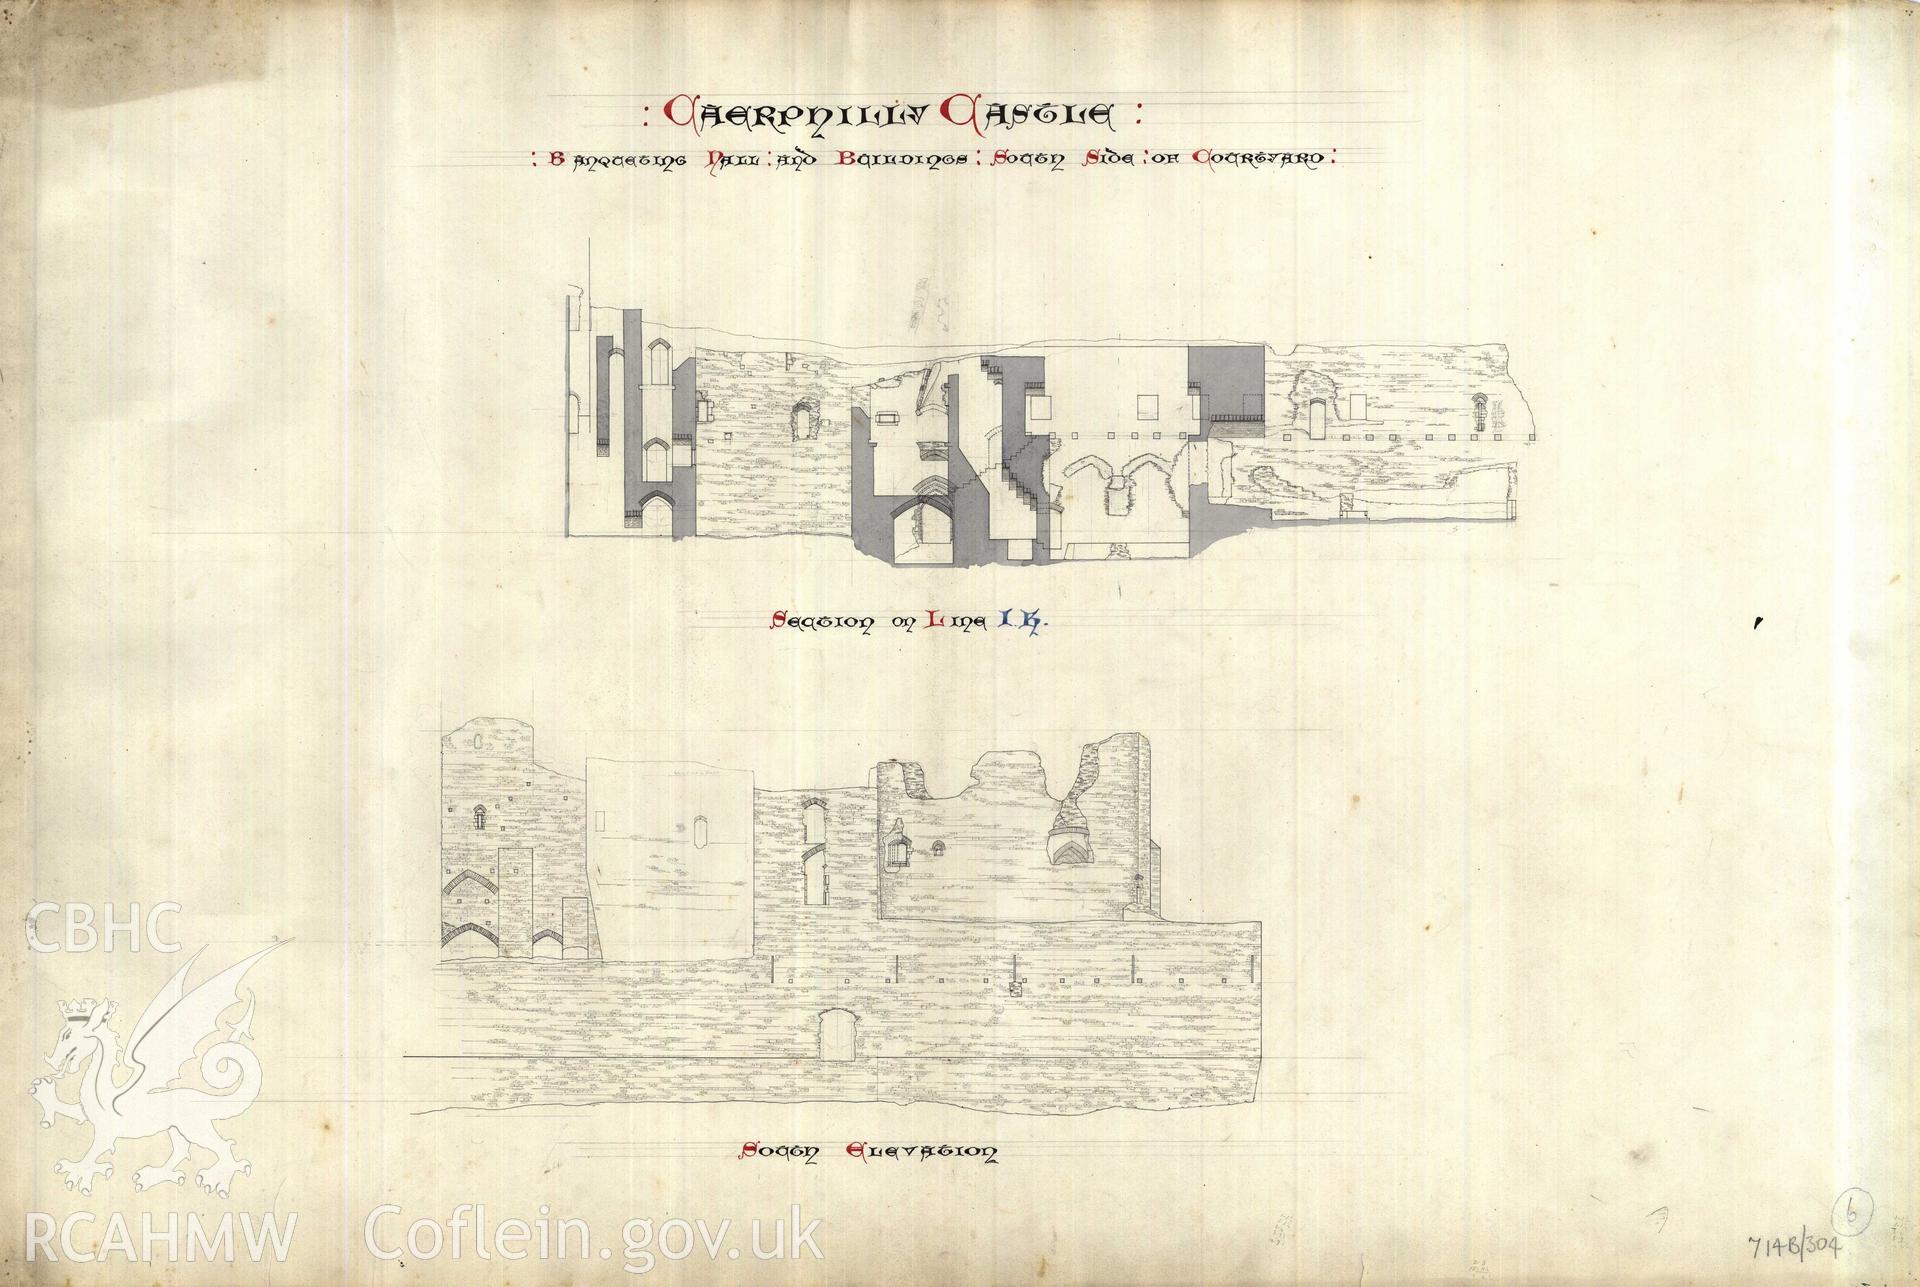 Cadw guardianship monument drawing of Caerphilly Castle. Inner Ward, S elev Mid Ward S elev. Cadw Ref. No:714B/304. Scale 1:96.